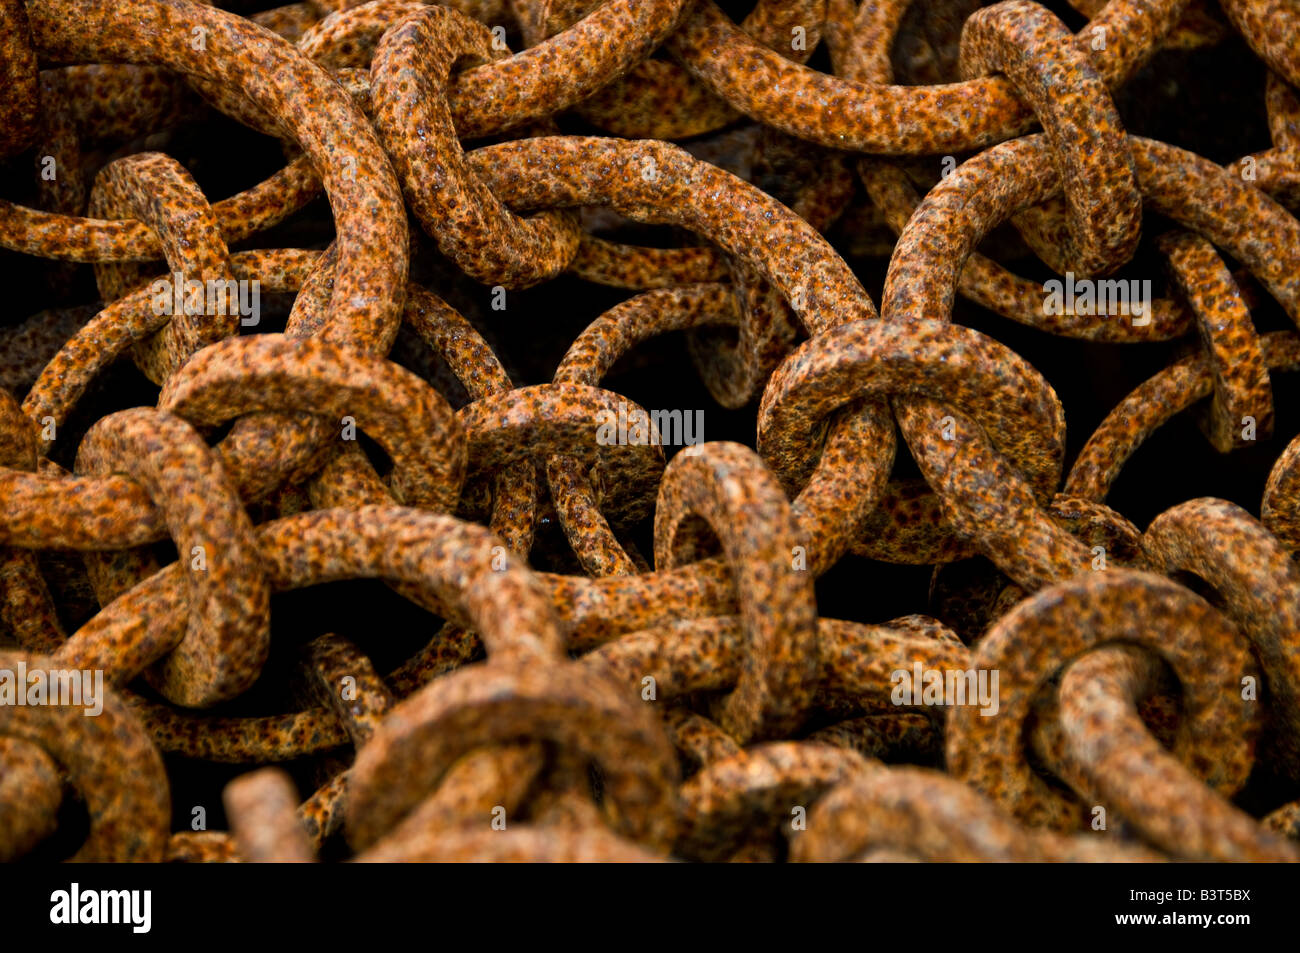 A pile of rusting chain links. Stock Photo